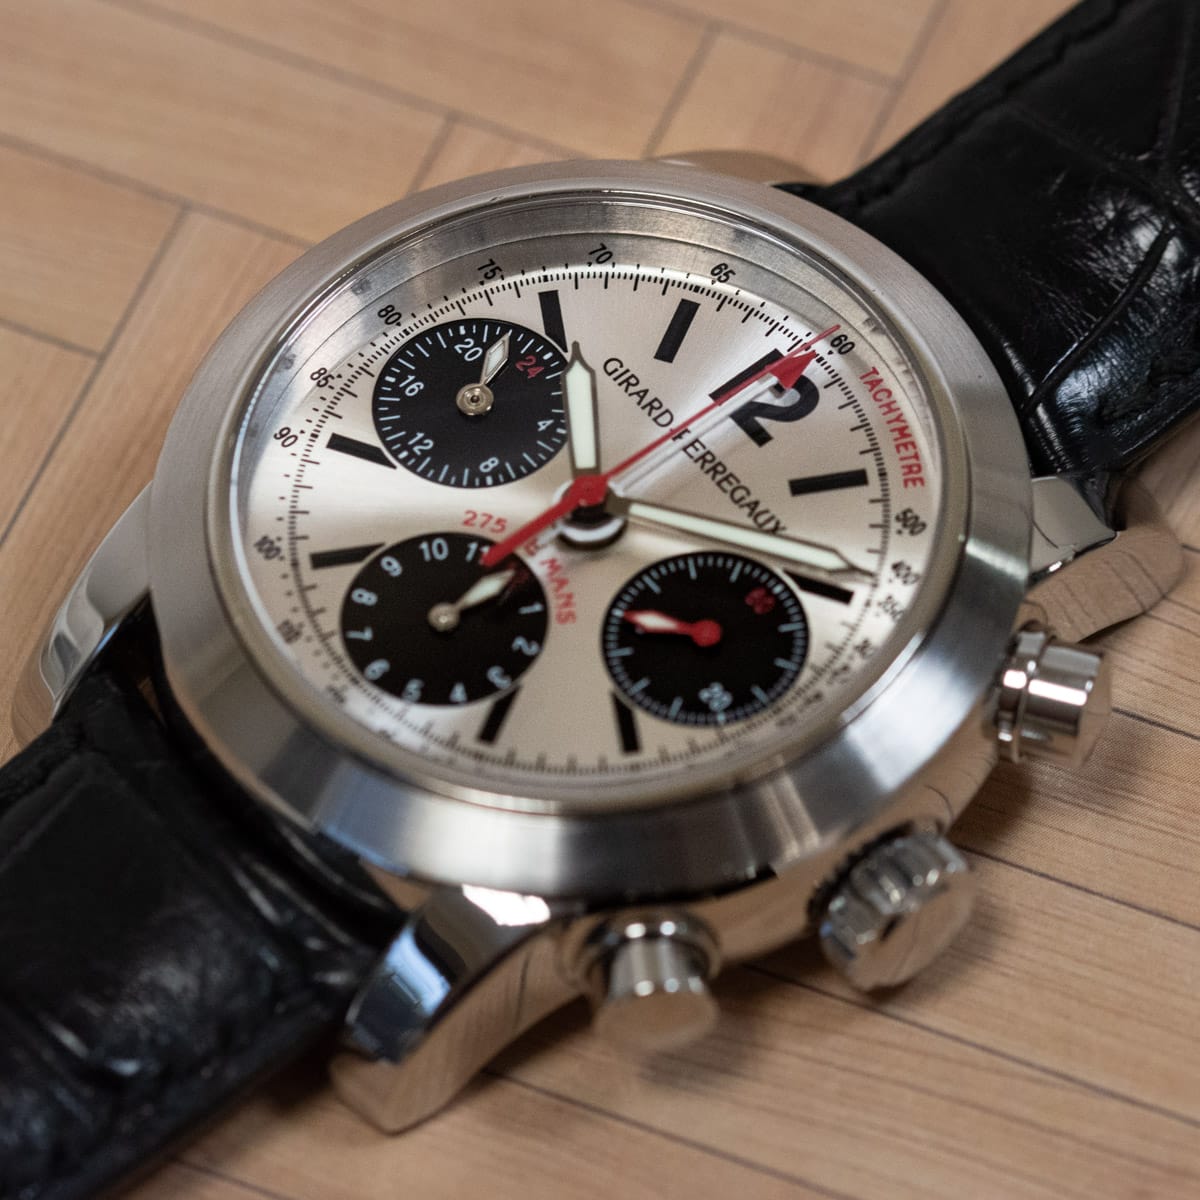 Stylied photo of  of Ferrari '275 Lemans' Chronograph